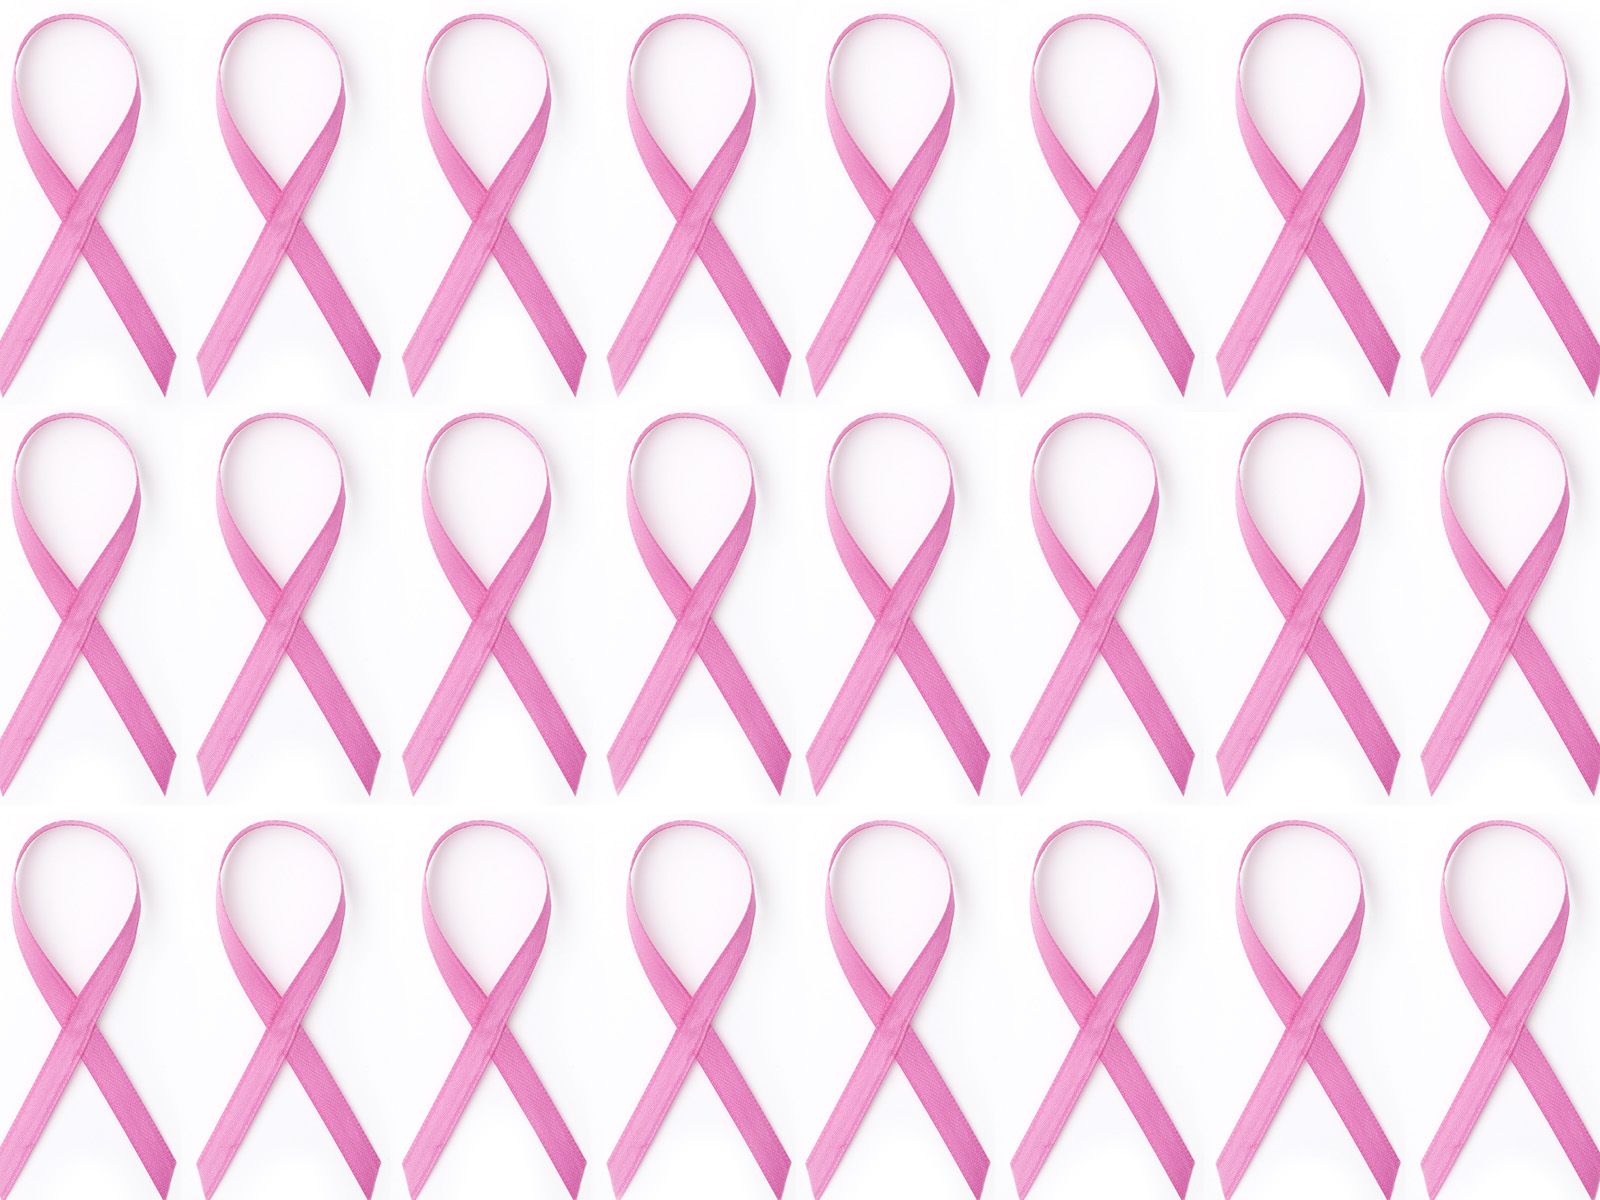 The Pink Ribbons of Breast Cancer Awareness